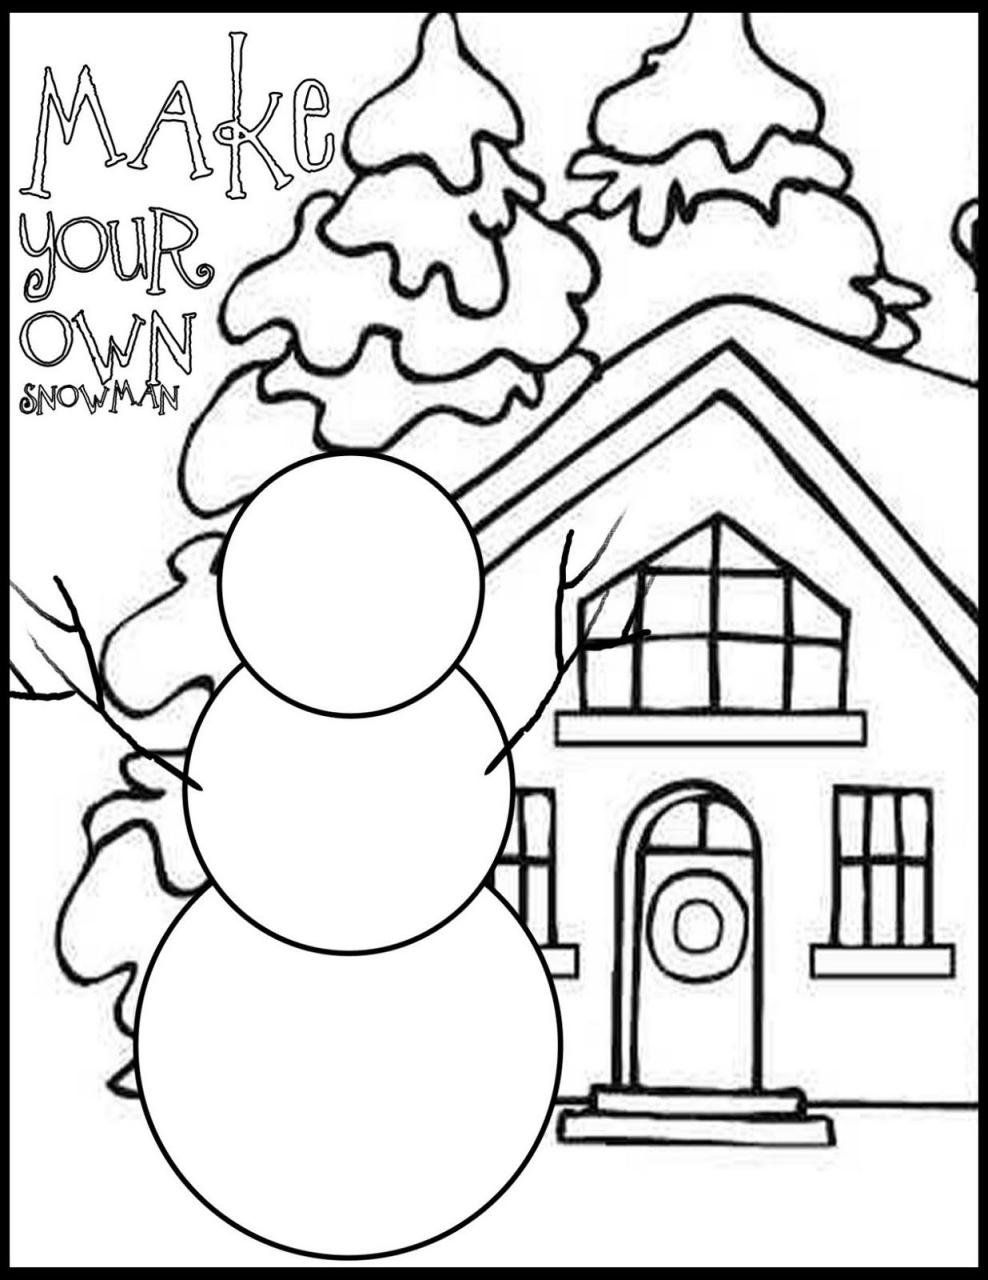 Christmas coloring pages, Snowman coloring pages, Preschool christmas